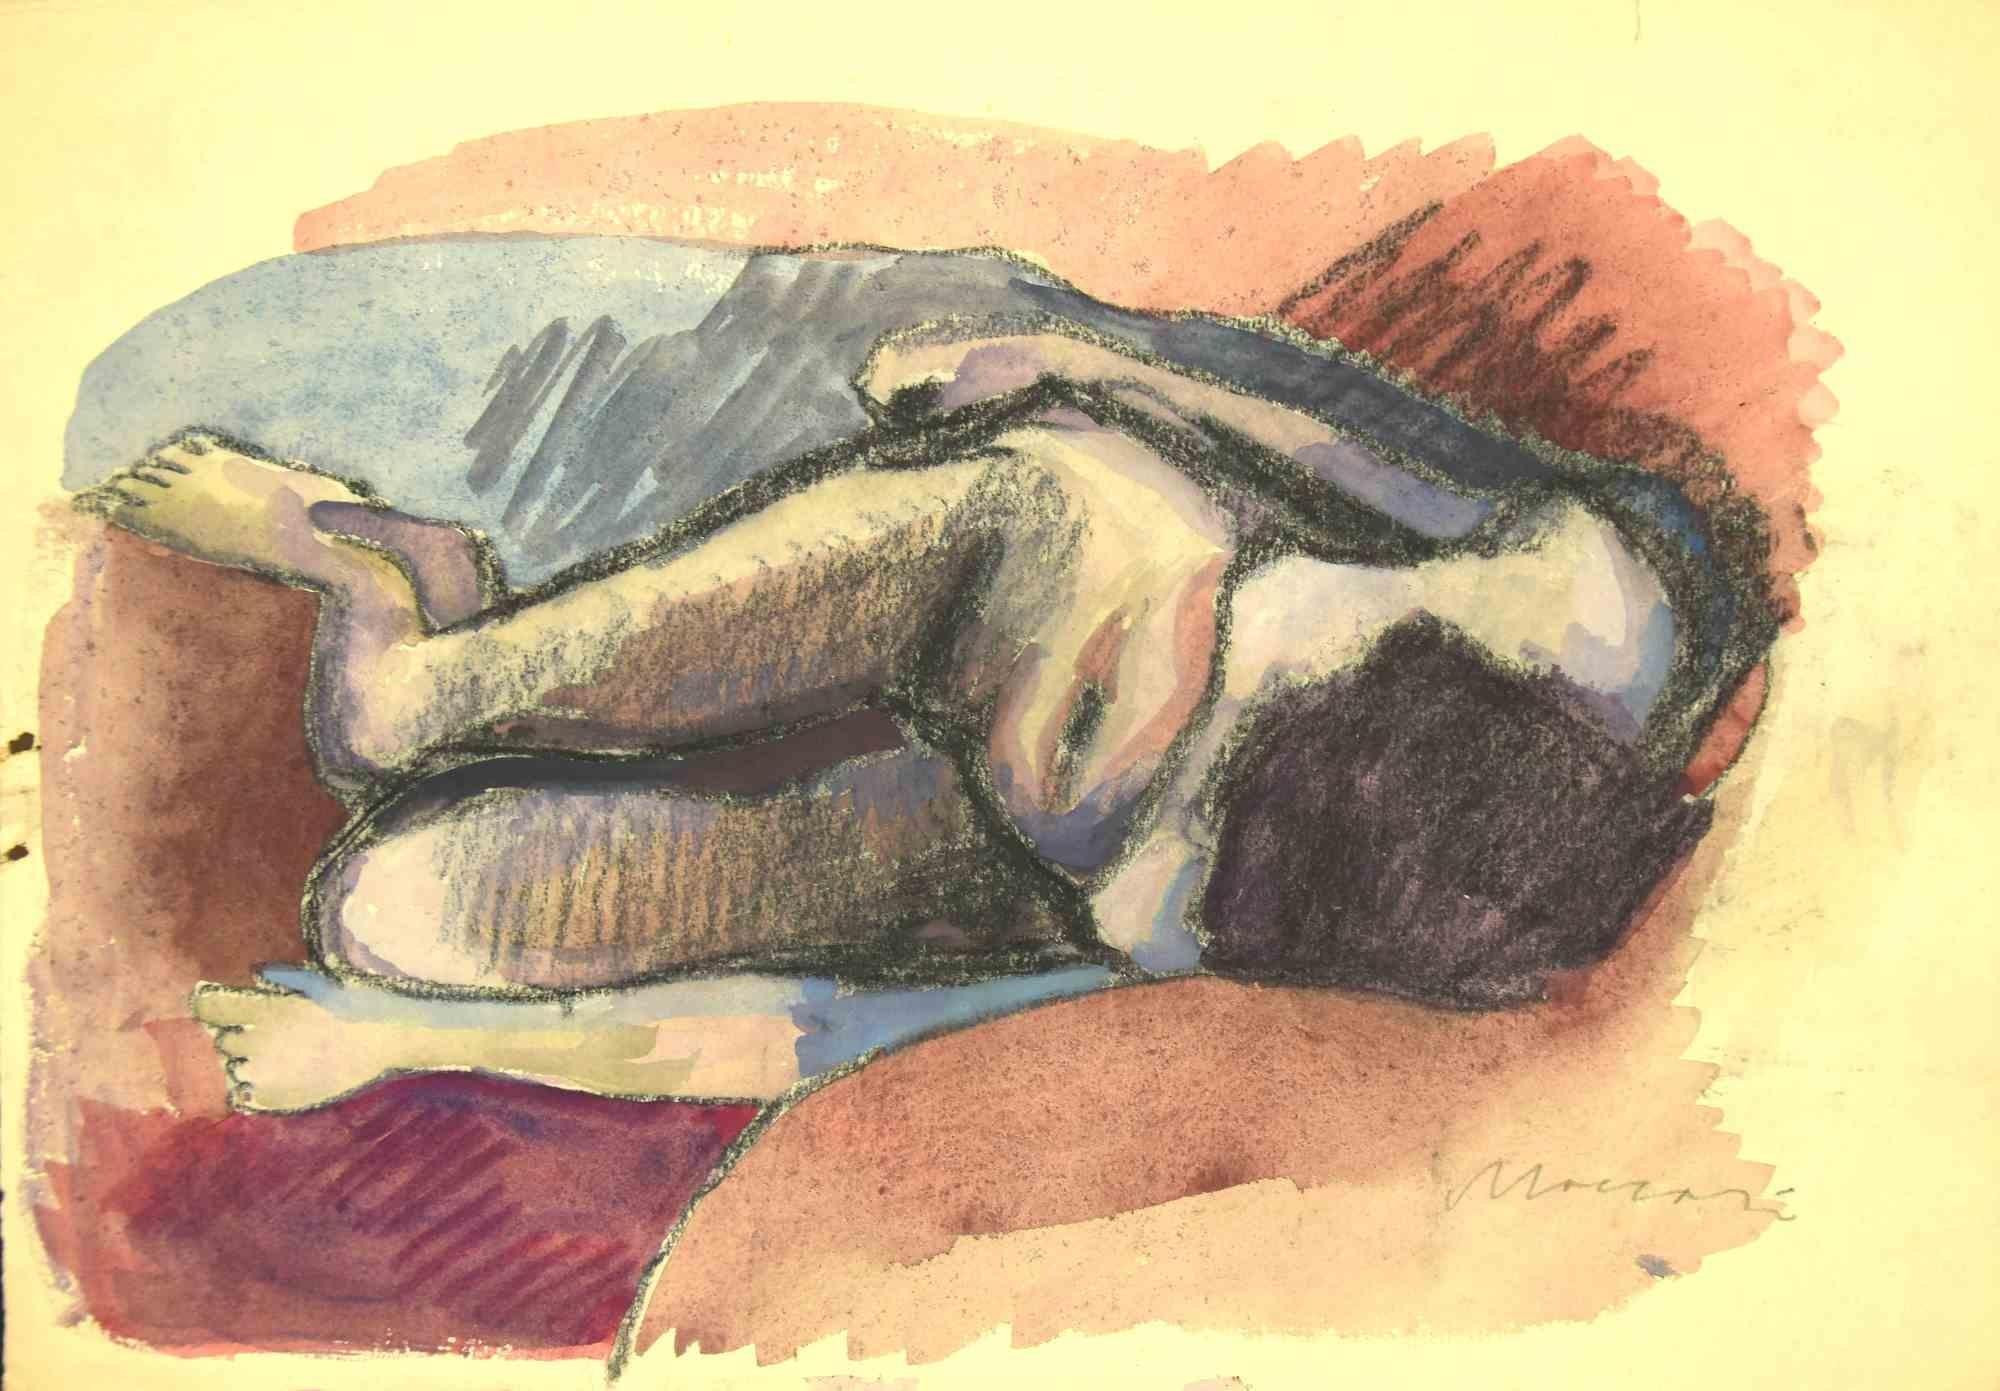 Reclined Nude is an original Charcoal and Watercolour Drawing realized by Mino Maccari in mid-20th century.

Good condition on a yellowed paper.

Hand-signed by the artist with pencil.

Mino Maccari (1898-1989) was an Italian writer, painter,